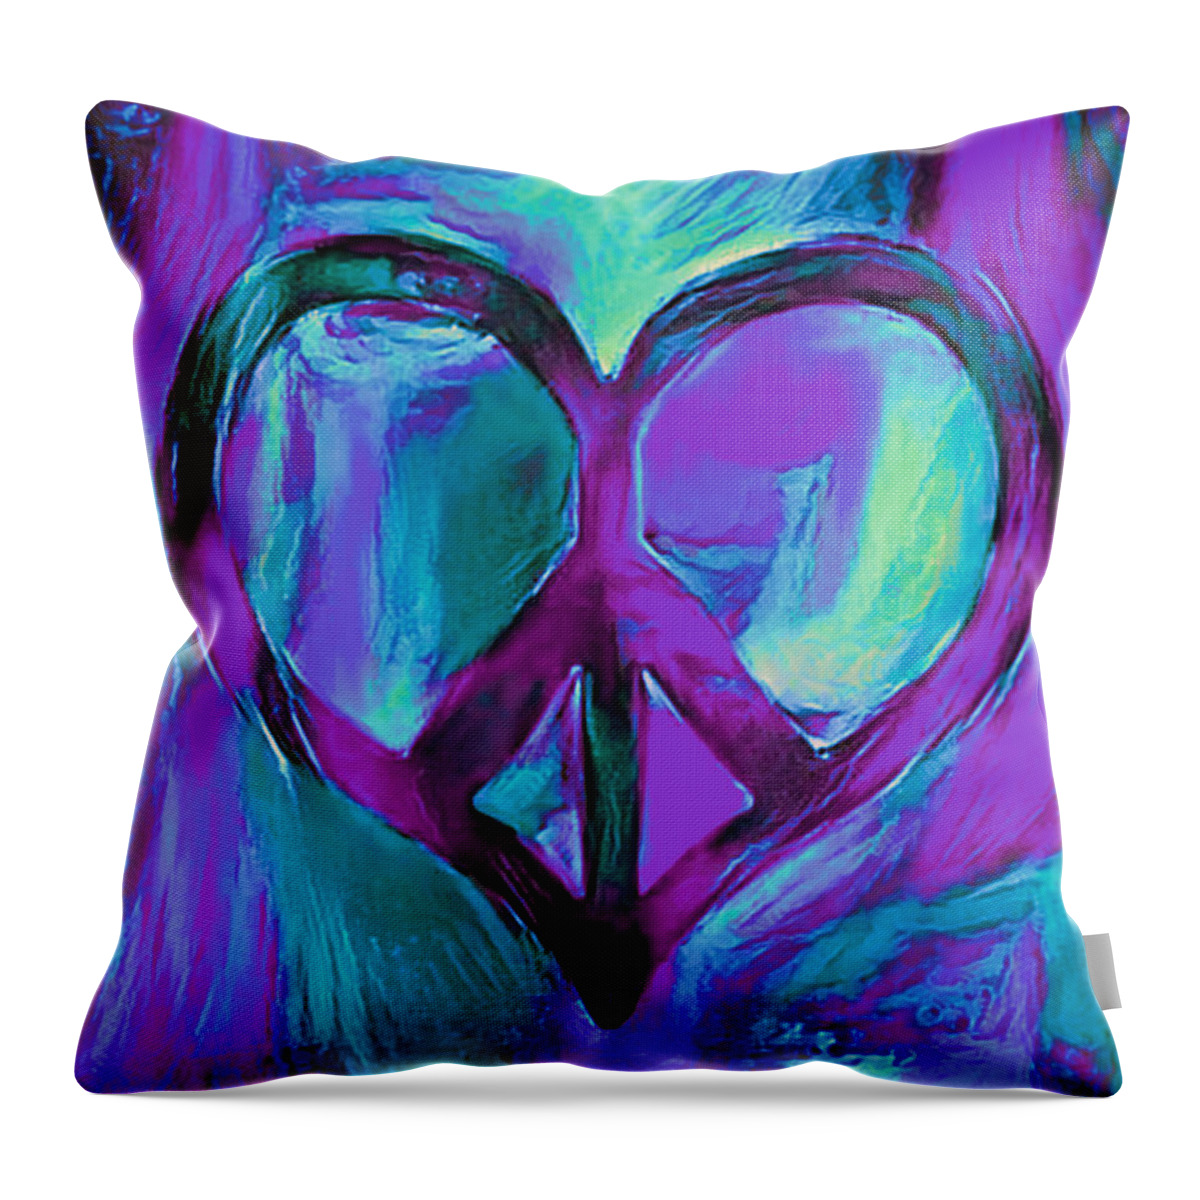 Peace Throw Pillow featuring the digital art Peace Of My Heart - Purple Teal by Artistic Mystic